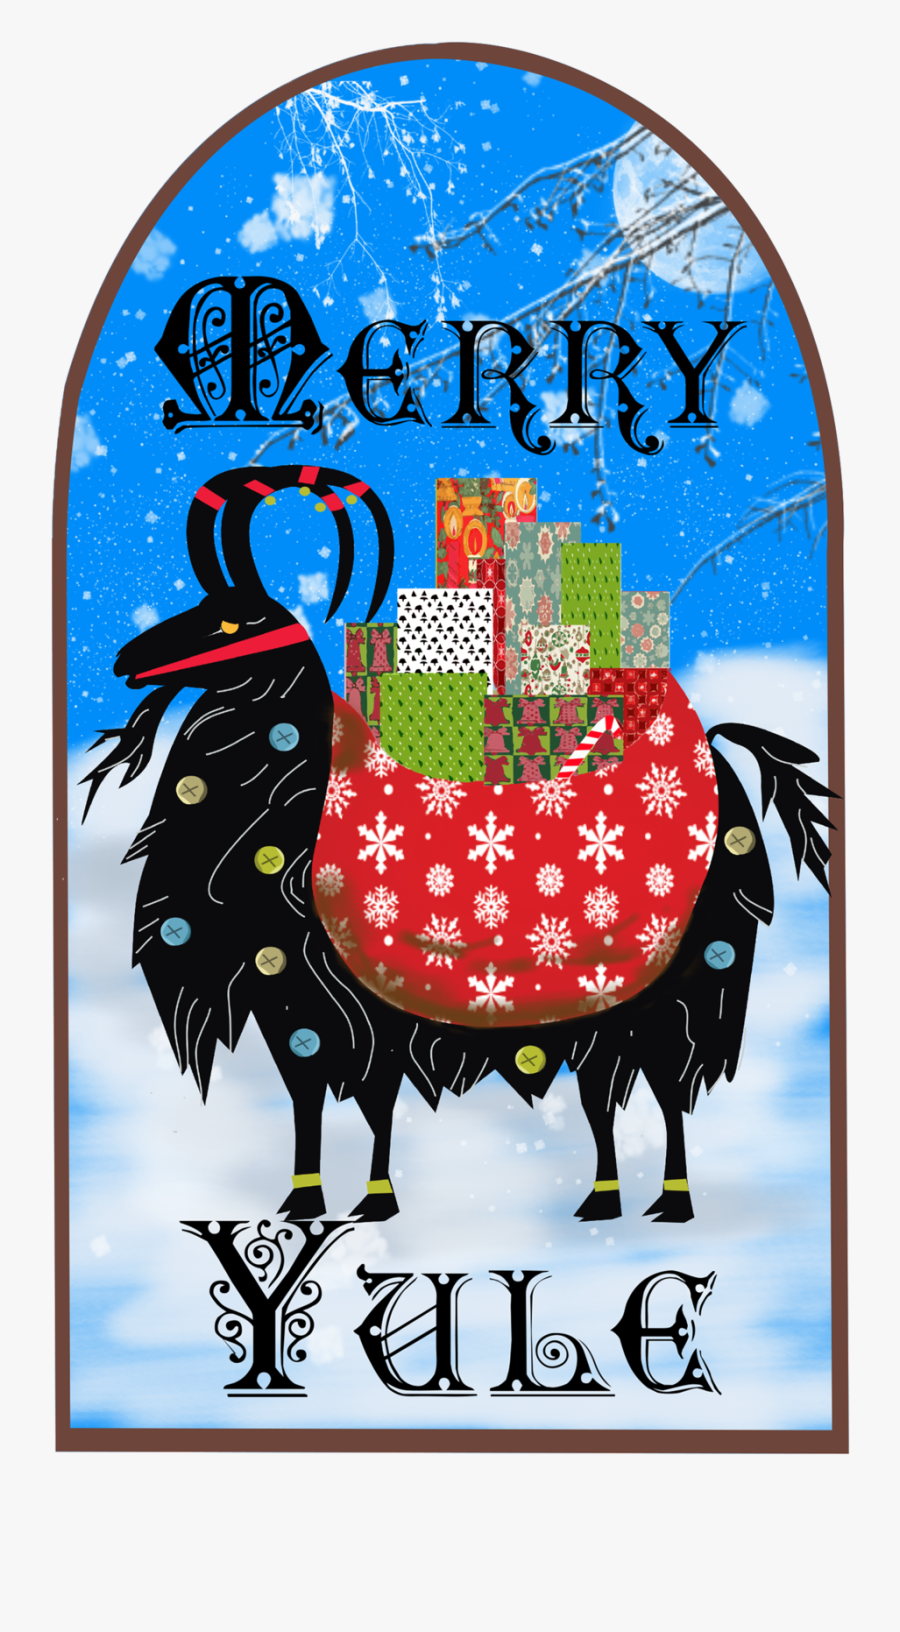 The Yule Goat A Flat Design That Features A Traditional - Nhà Kho Ký Gửi, Transparent Clipart